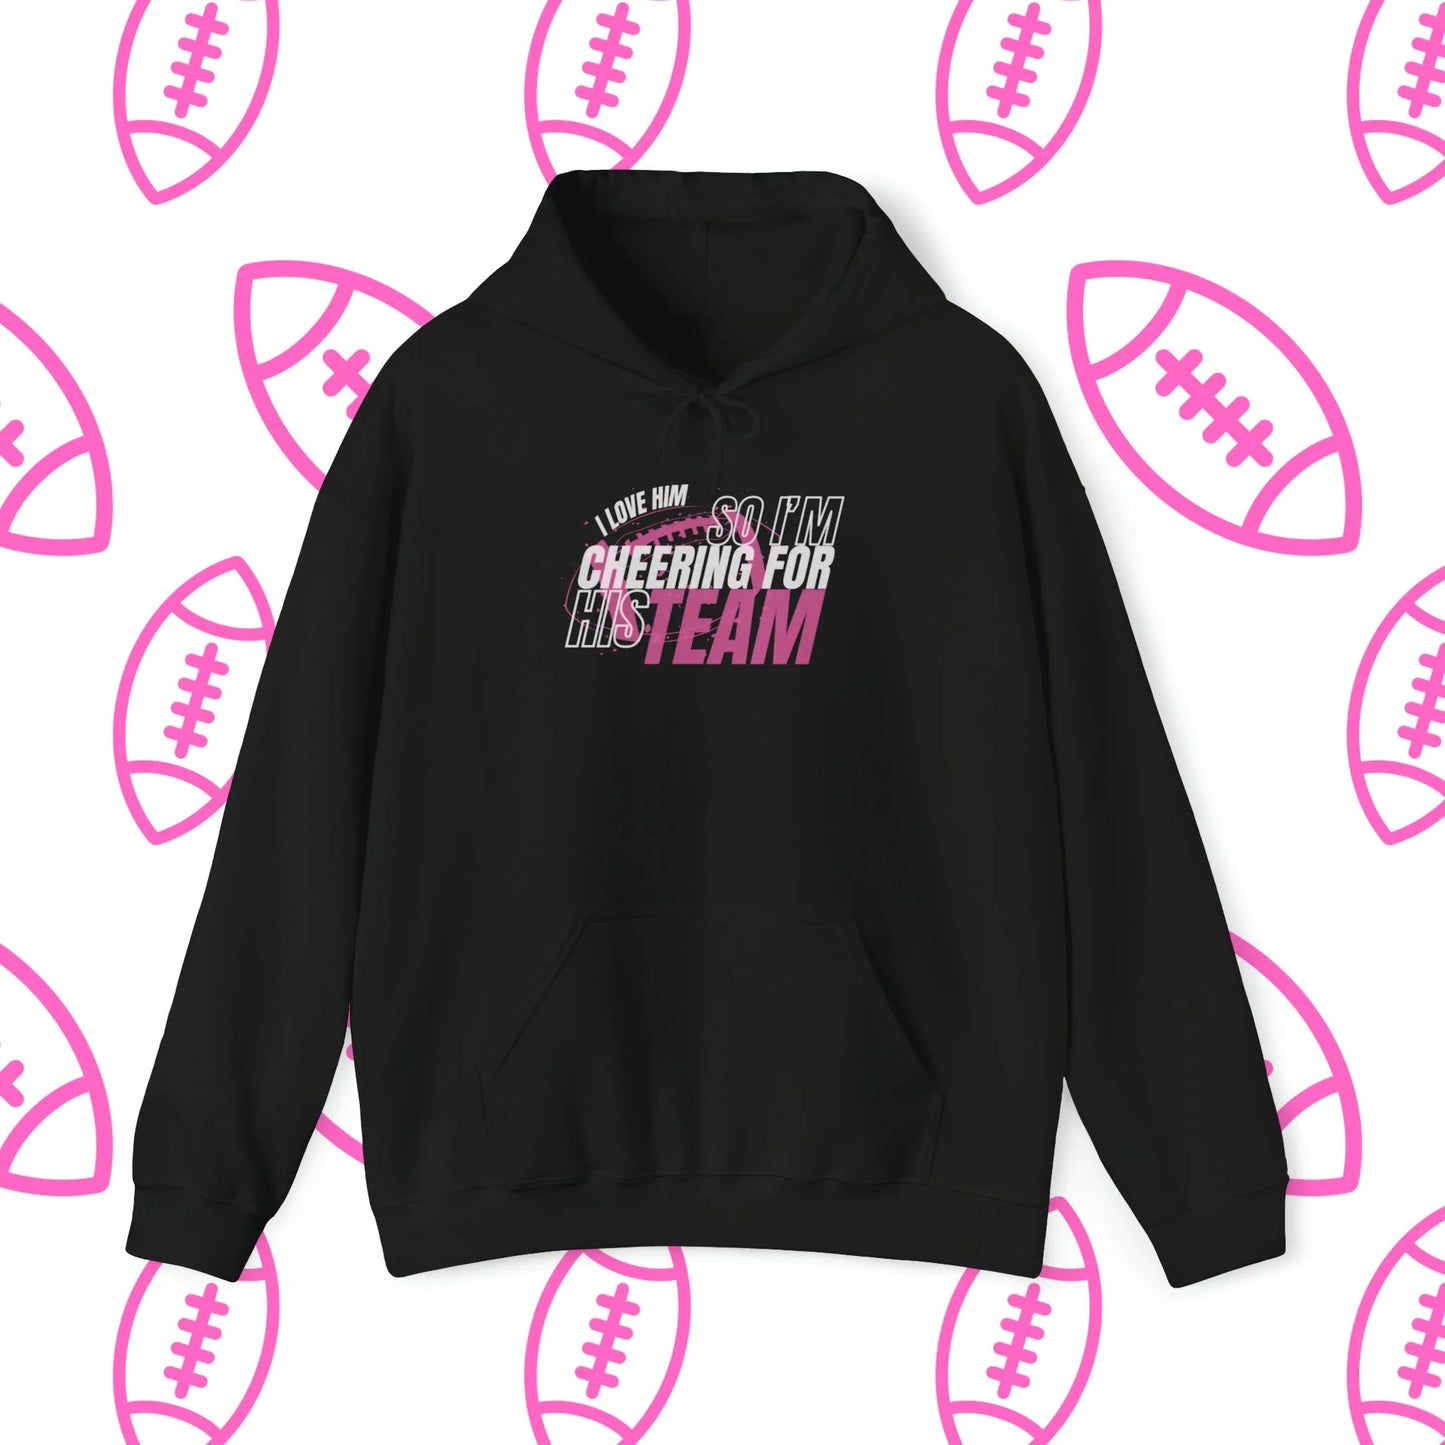 I Love Him So I'm Cheering For His Team Hooded Sweatshirt Black Front